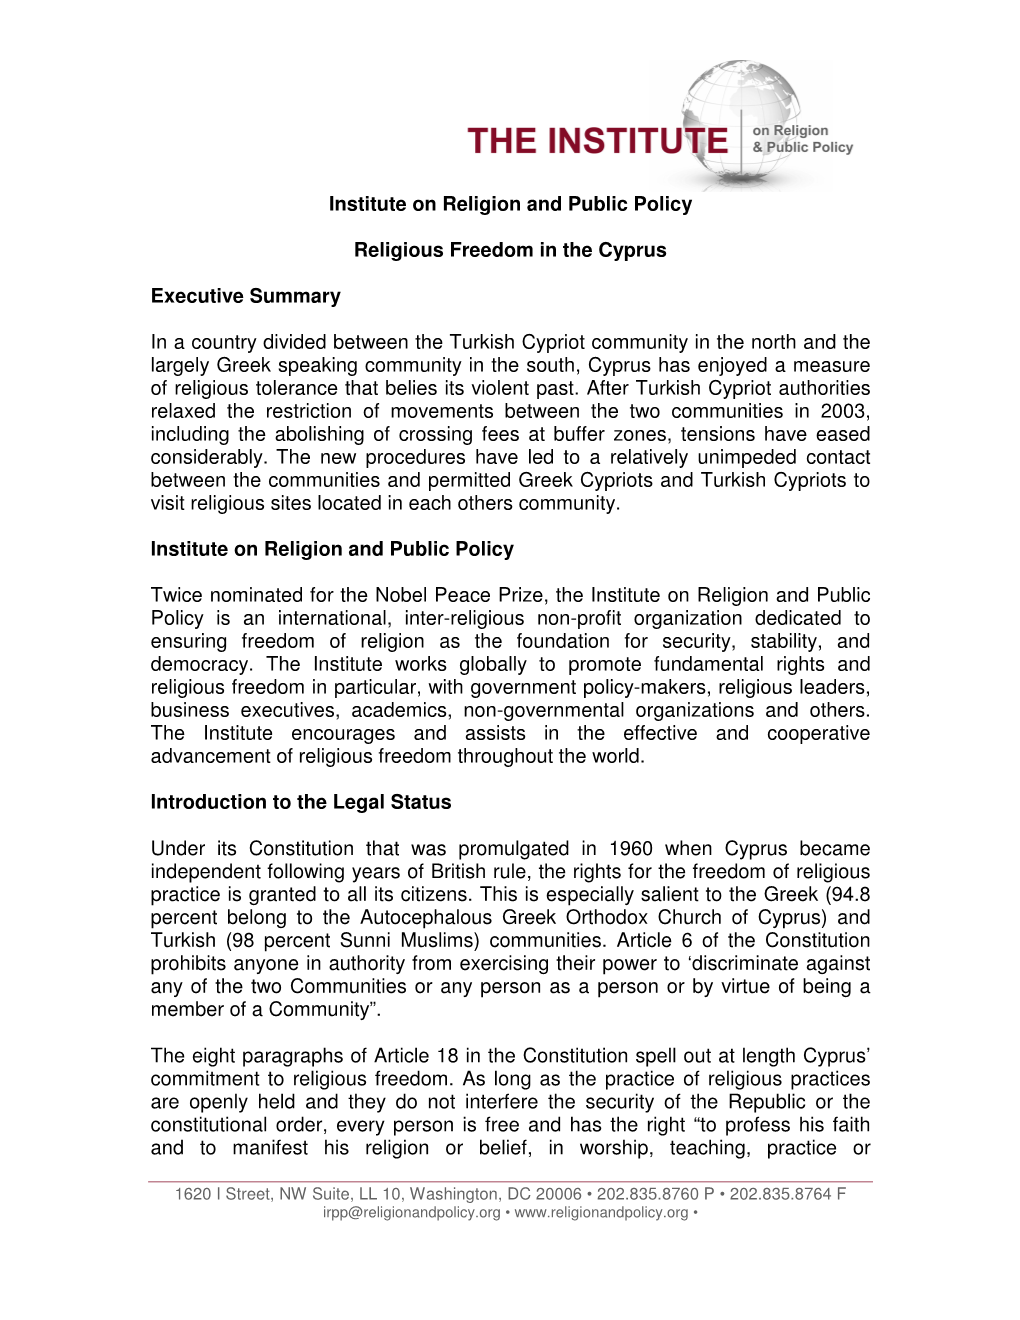 Institute on Religion and Public Policy Religious Freedom in the Cyprus